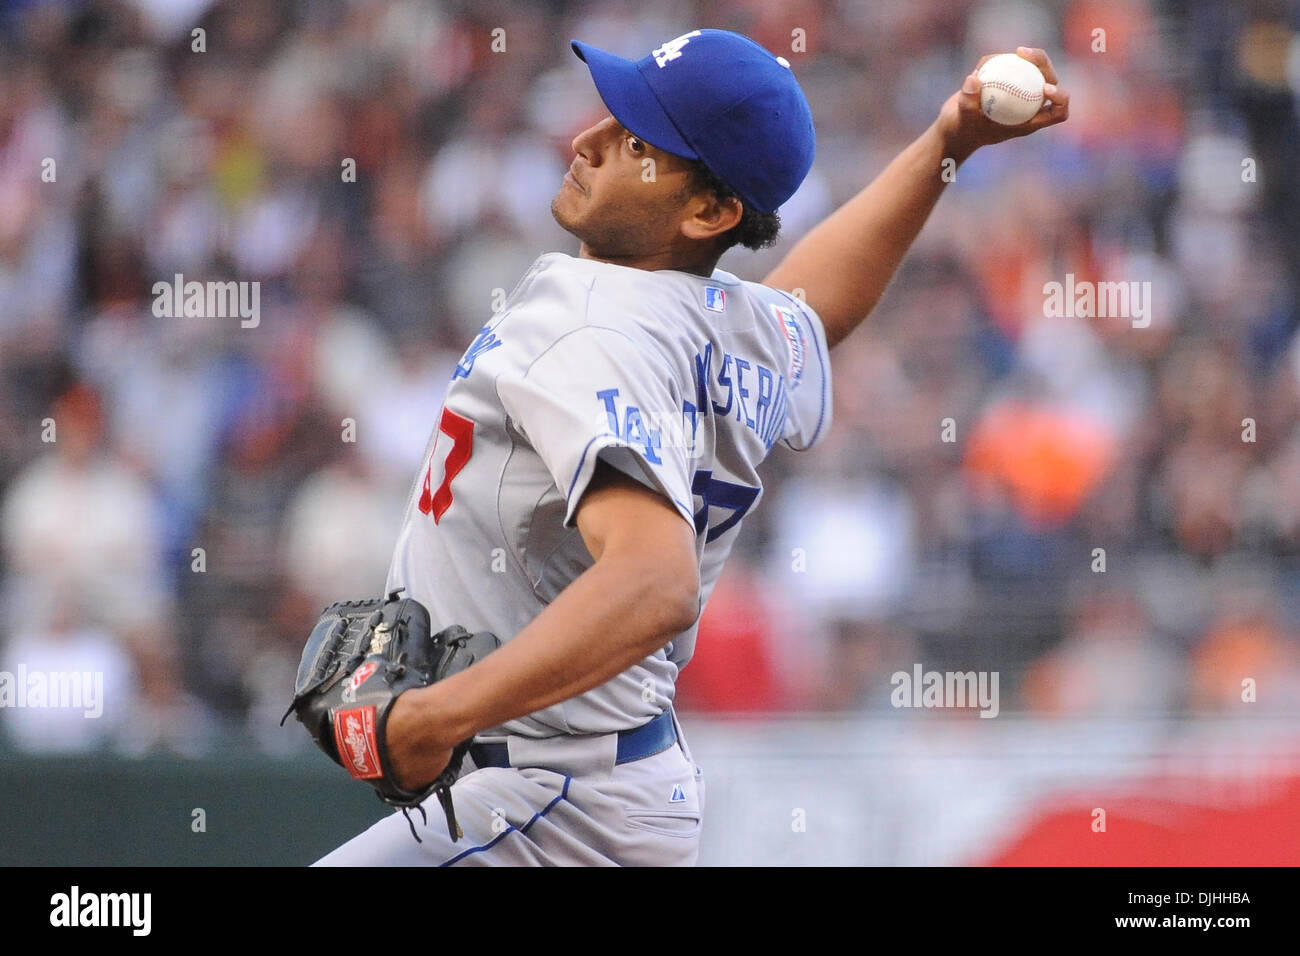 San Francisco, CA: The Los Angeles Dodgers starting pitcher Carlos Monasterios (37) pitches the ball. The San Francisco Giants won the game 6-5. (Credit Image: © Charles Herskowitz/Southcreek Global/ZUMApress.com) Stock Photo